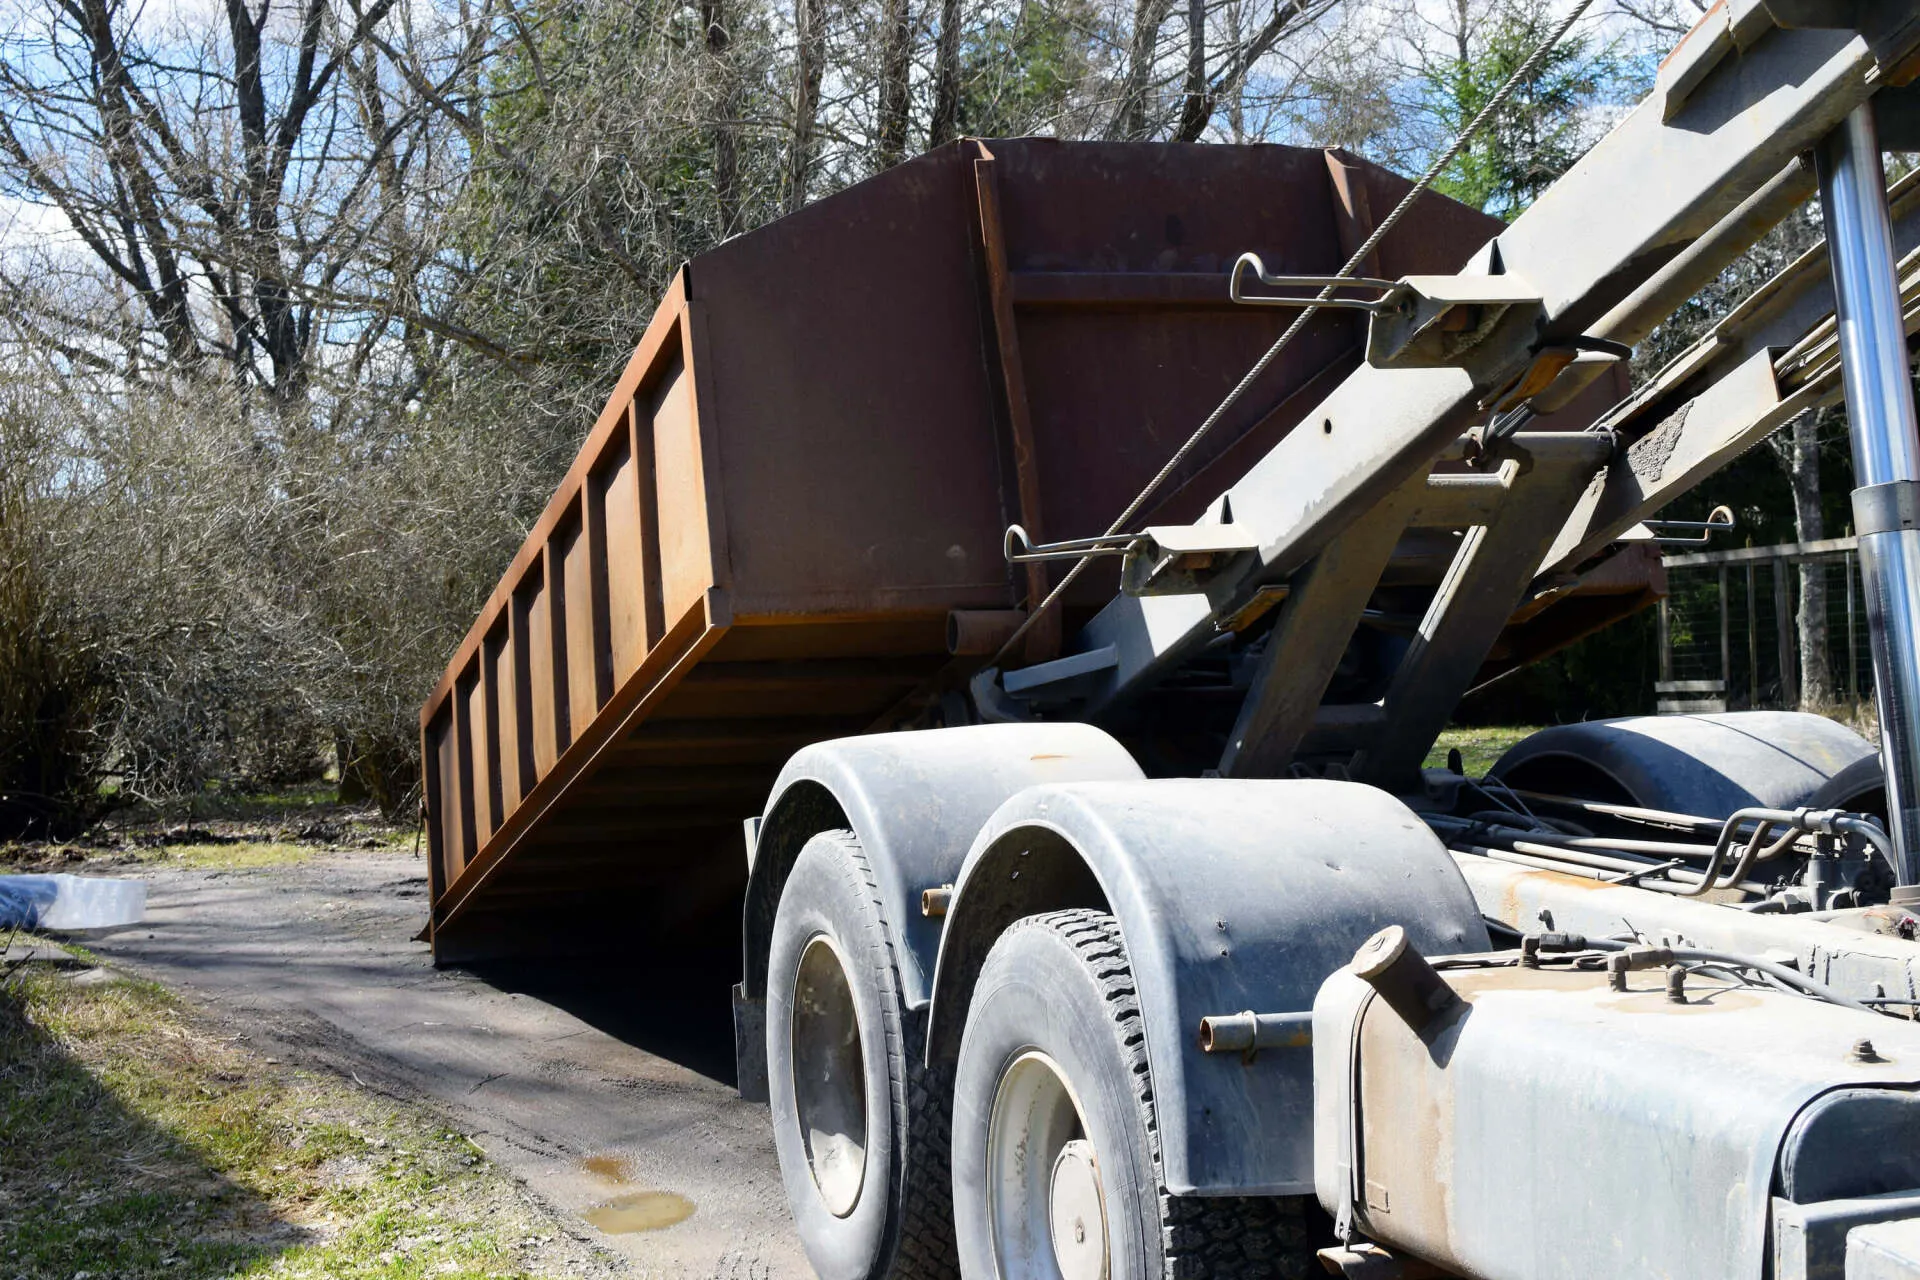 How Much Does A Dumpster Rental Cost?